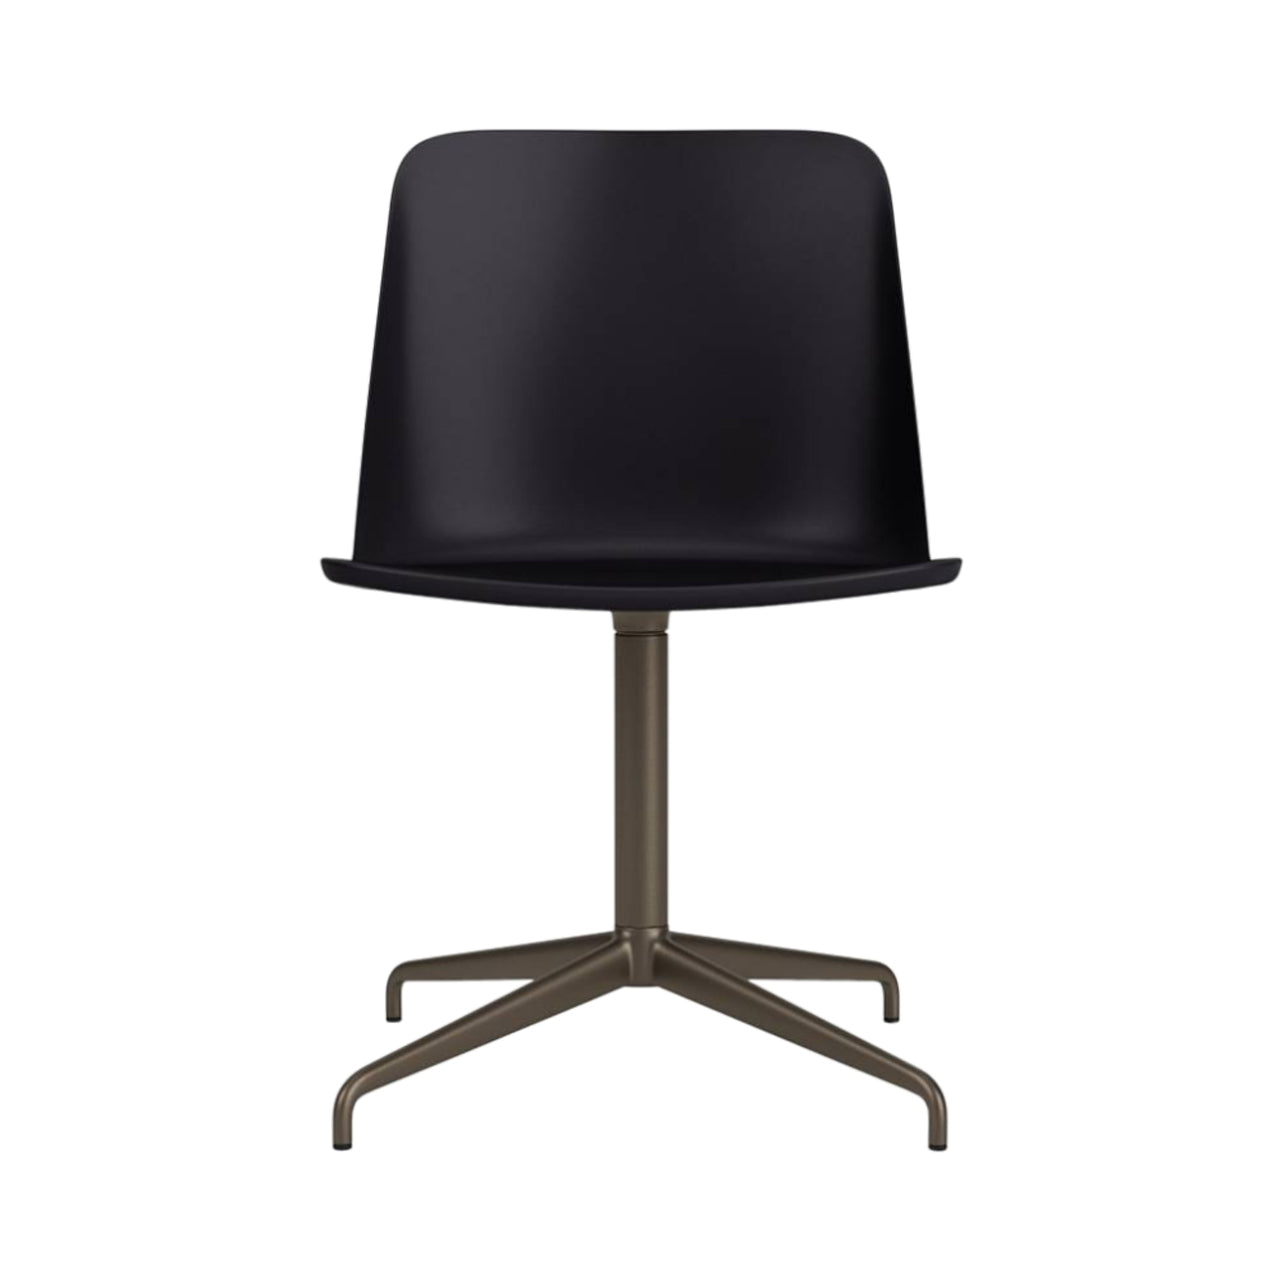 Rely Chair HW11: Black + Bronzed